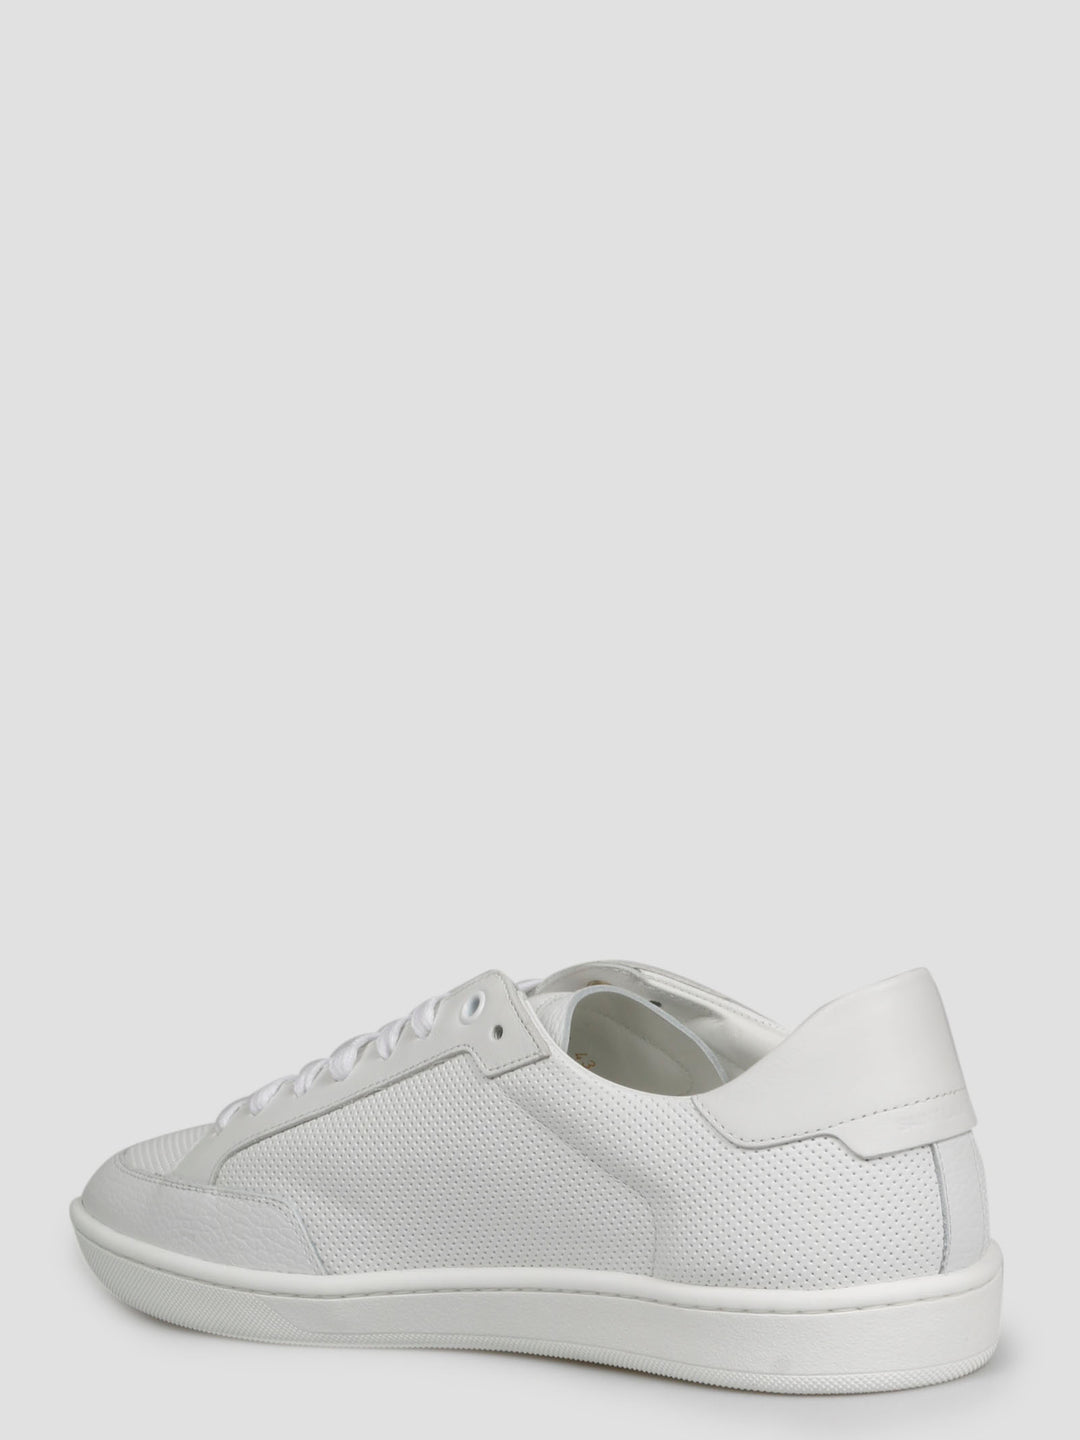 Court classic sl/10 sneakers